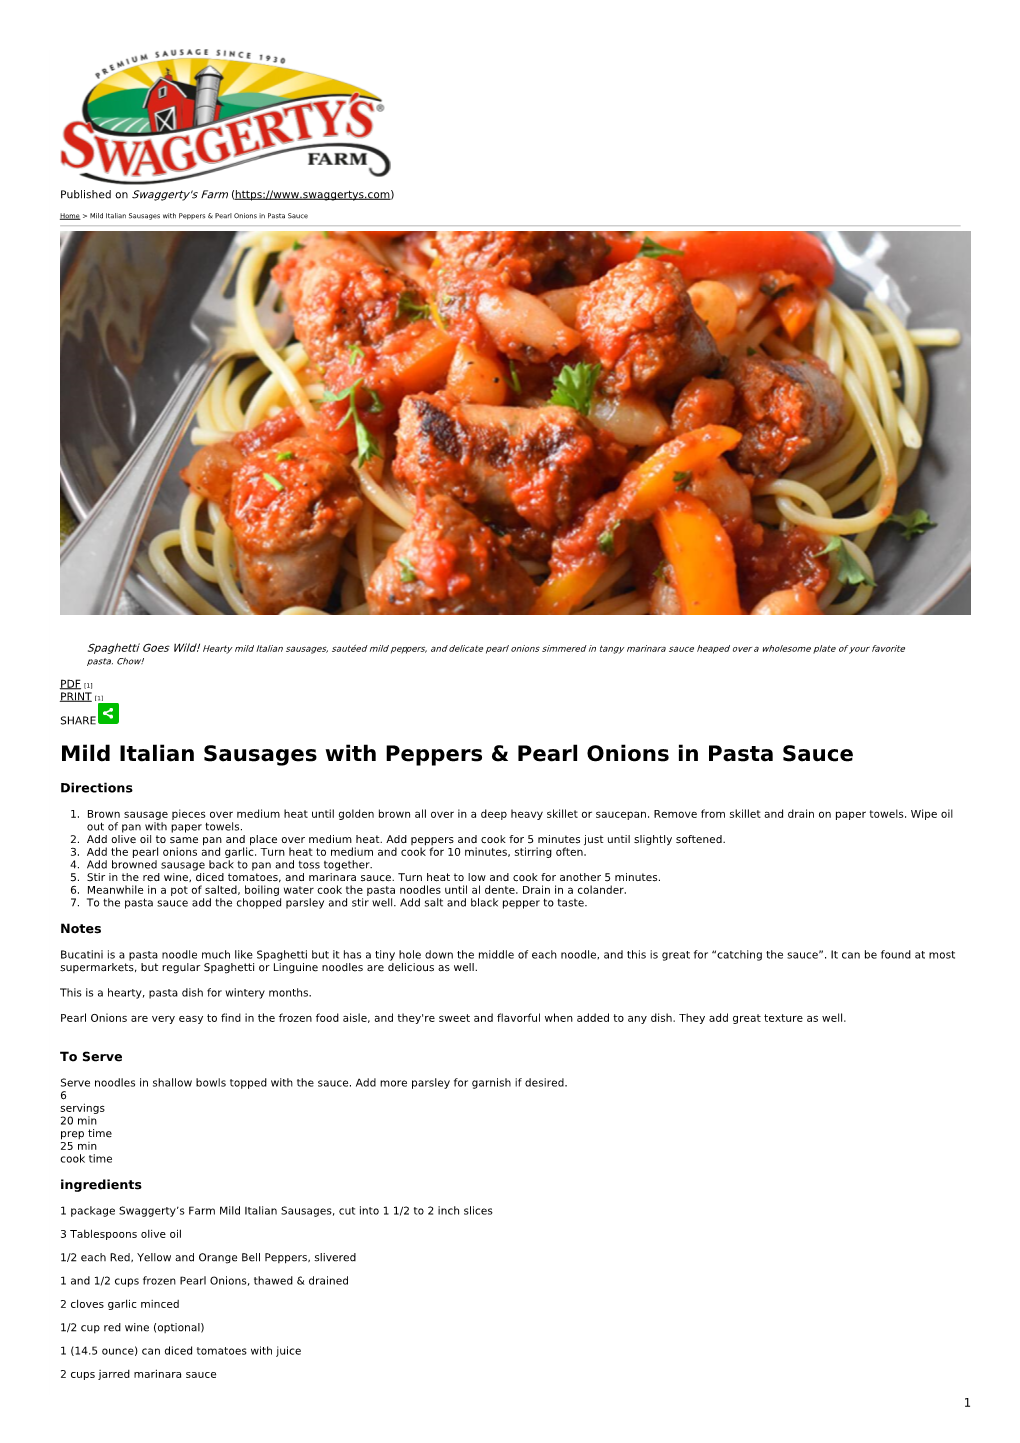 Mild Italian Sausages with Peppers & Pearl Onions in Pasta Sauce